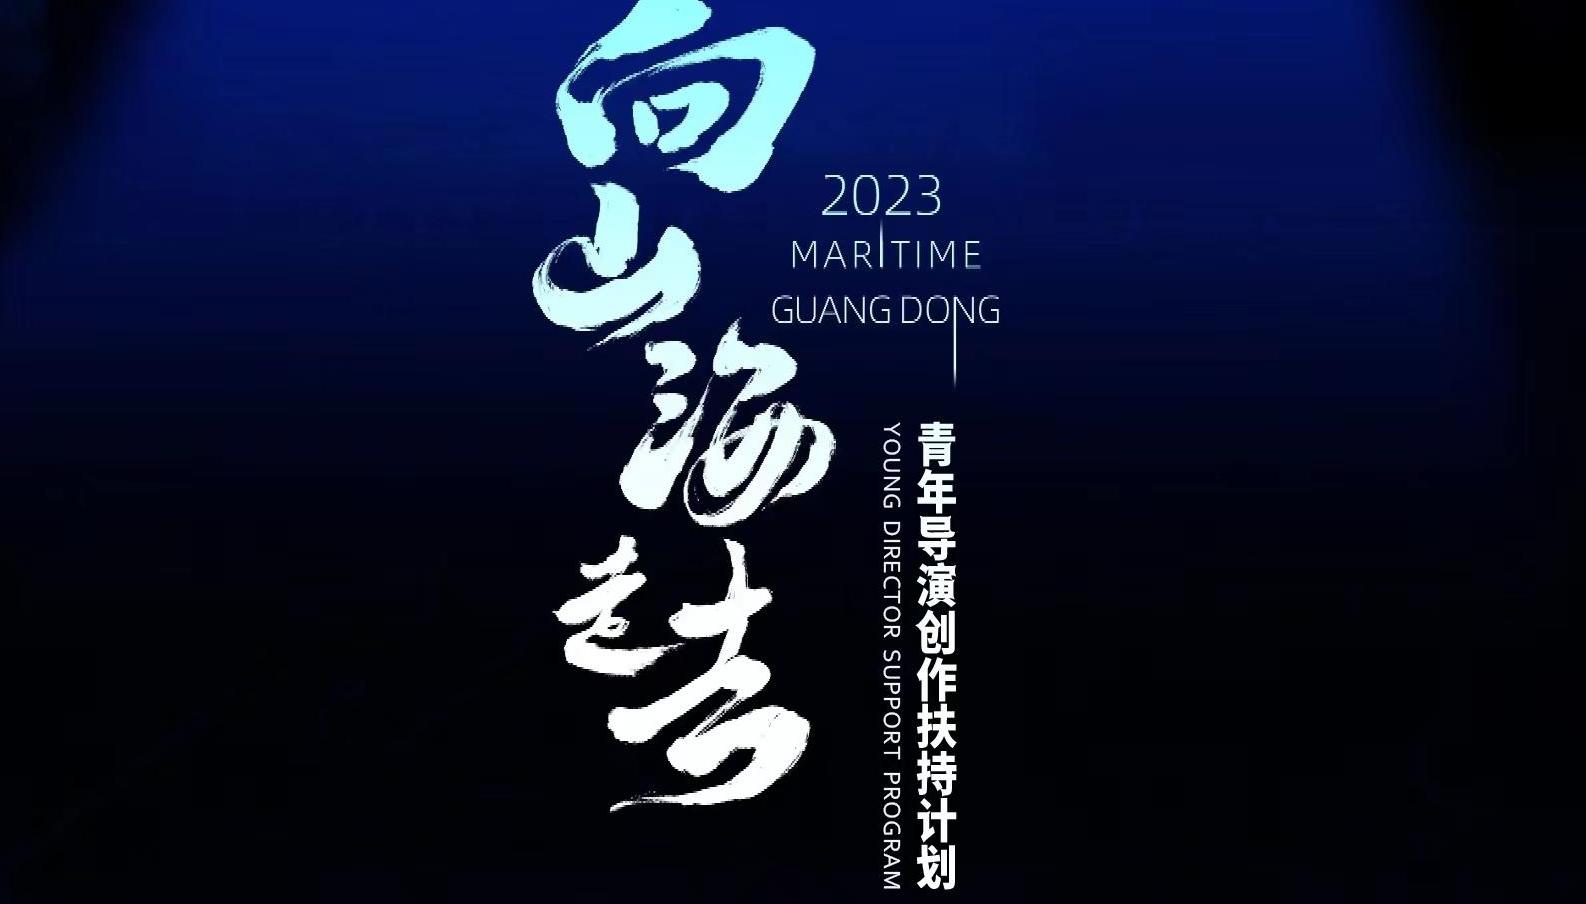 Video丨First professional line-up for the 2023 Maritime Guangdong Program announced